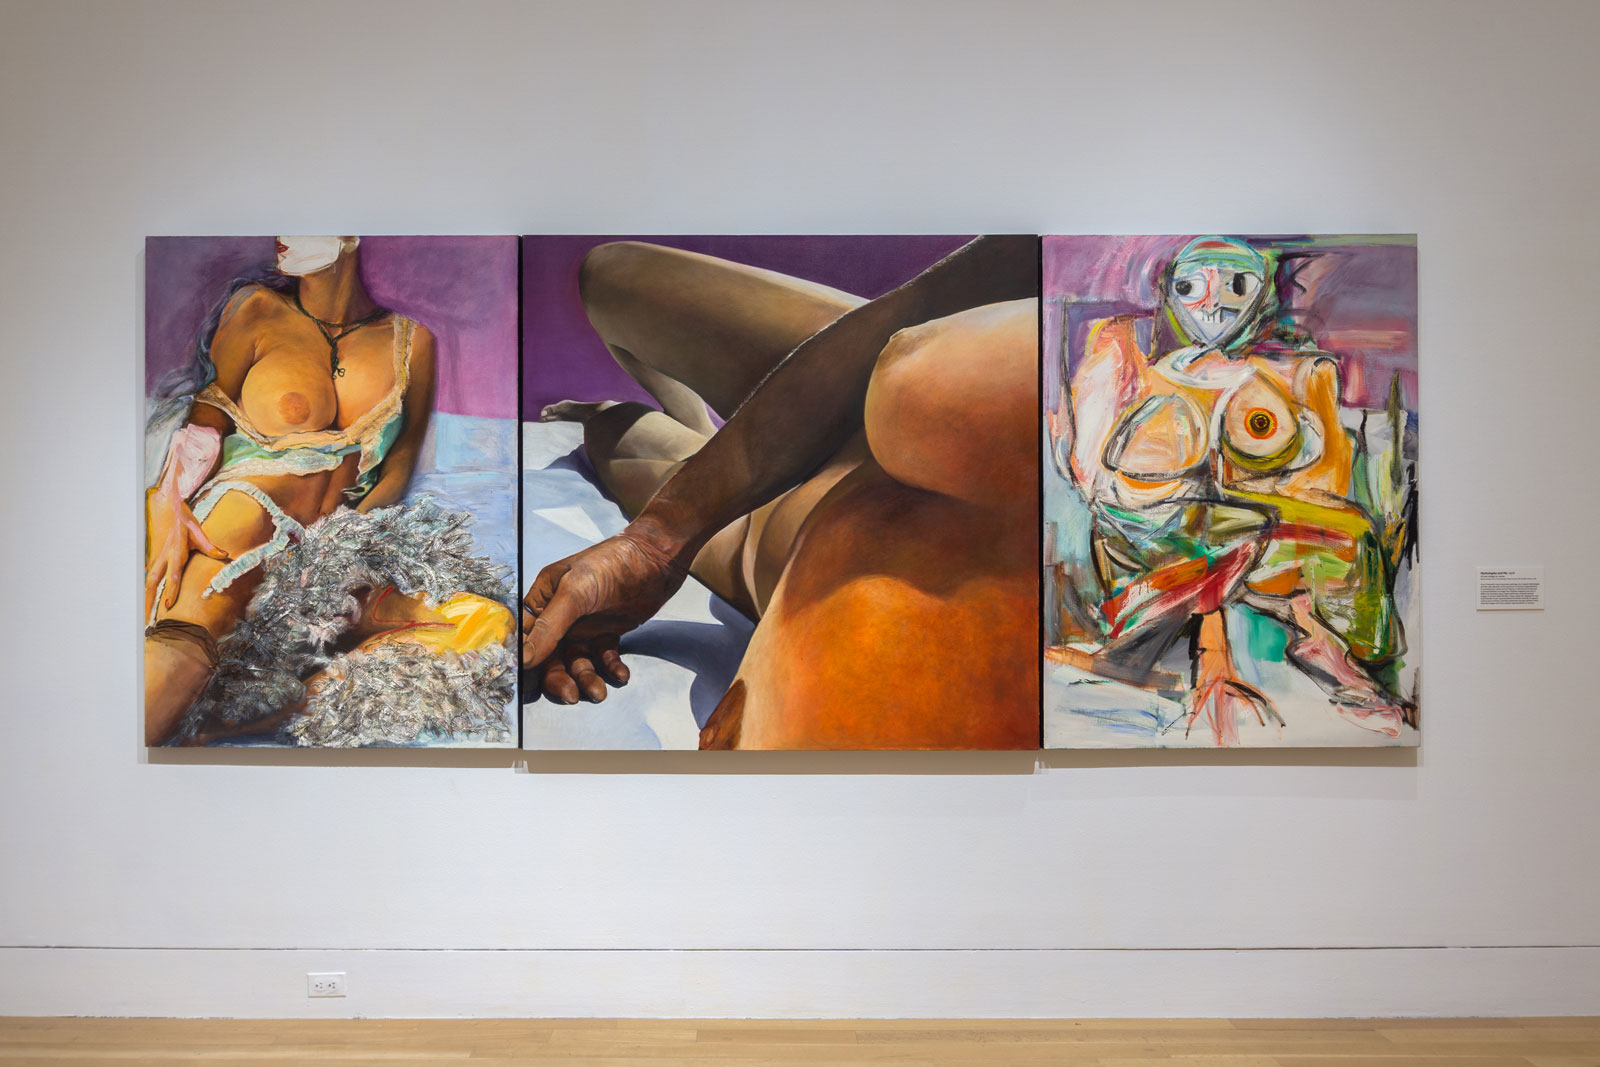 Artblog Sex, aging bodies and the human condition, Joan Semmels overdue first solo museum show, at Pennsylvania Academy of the Fine Arts